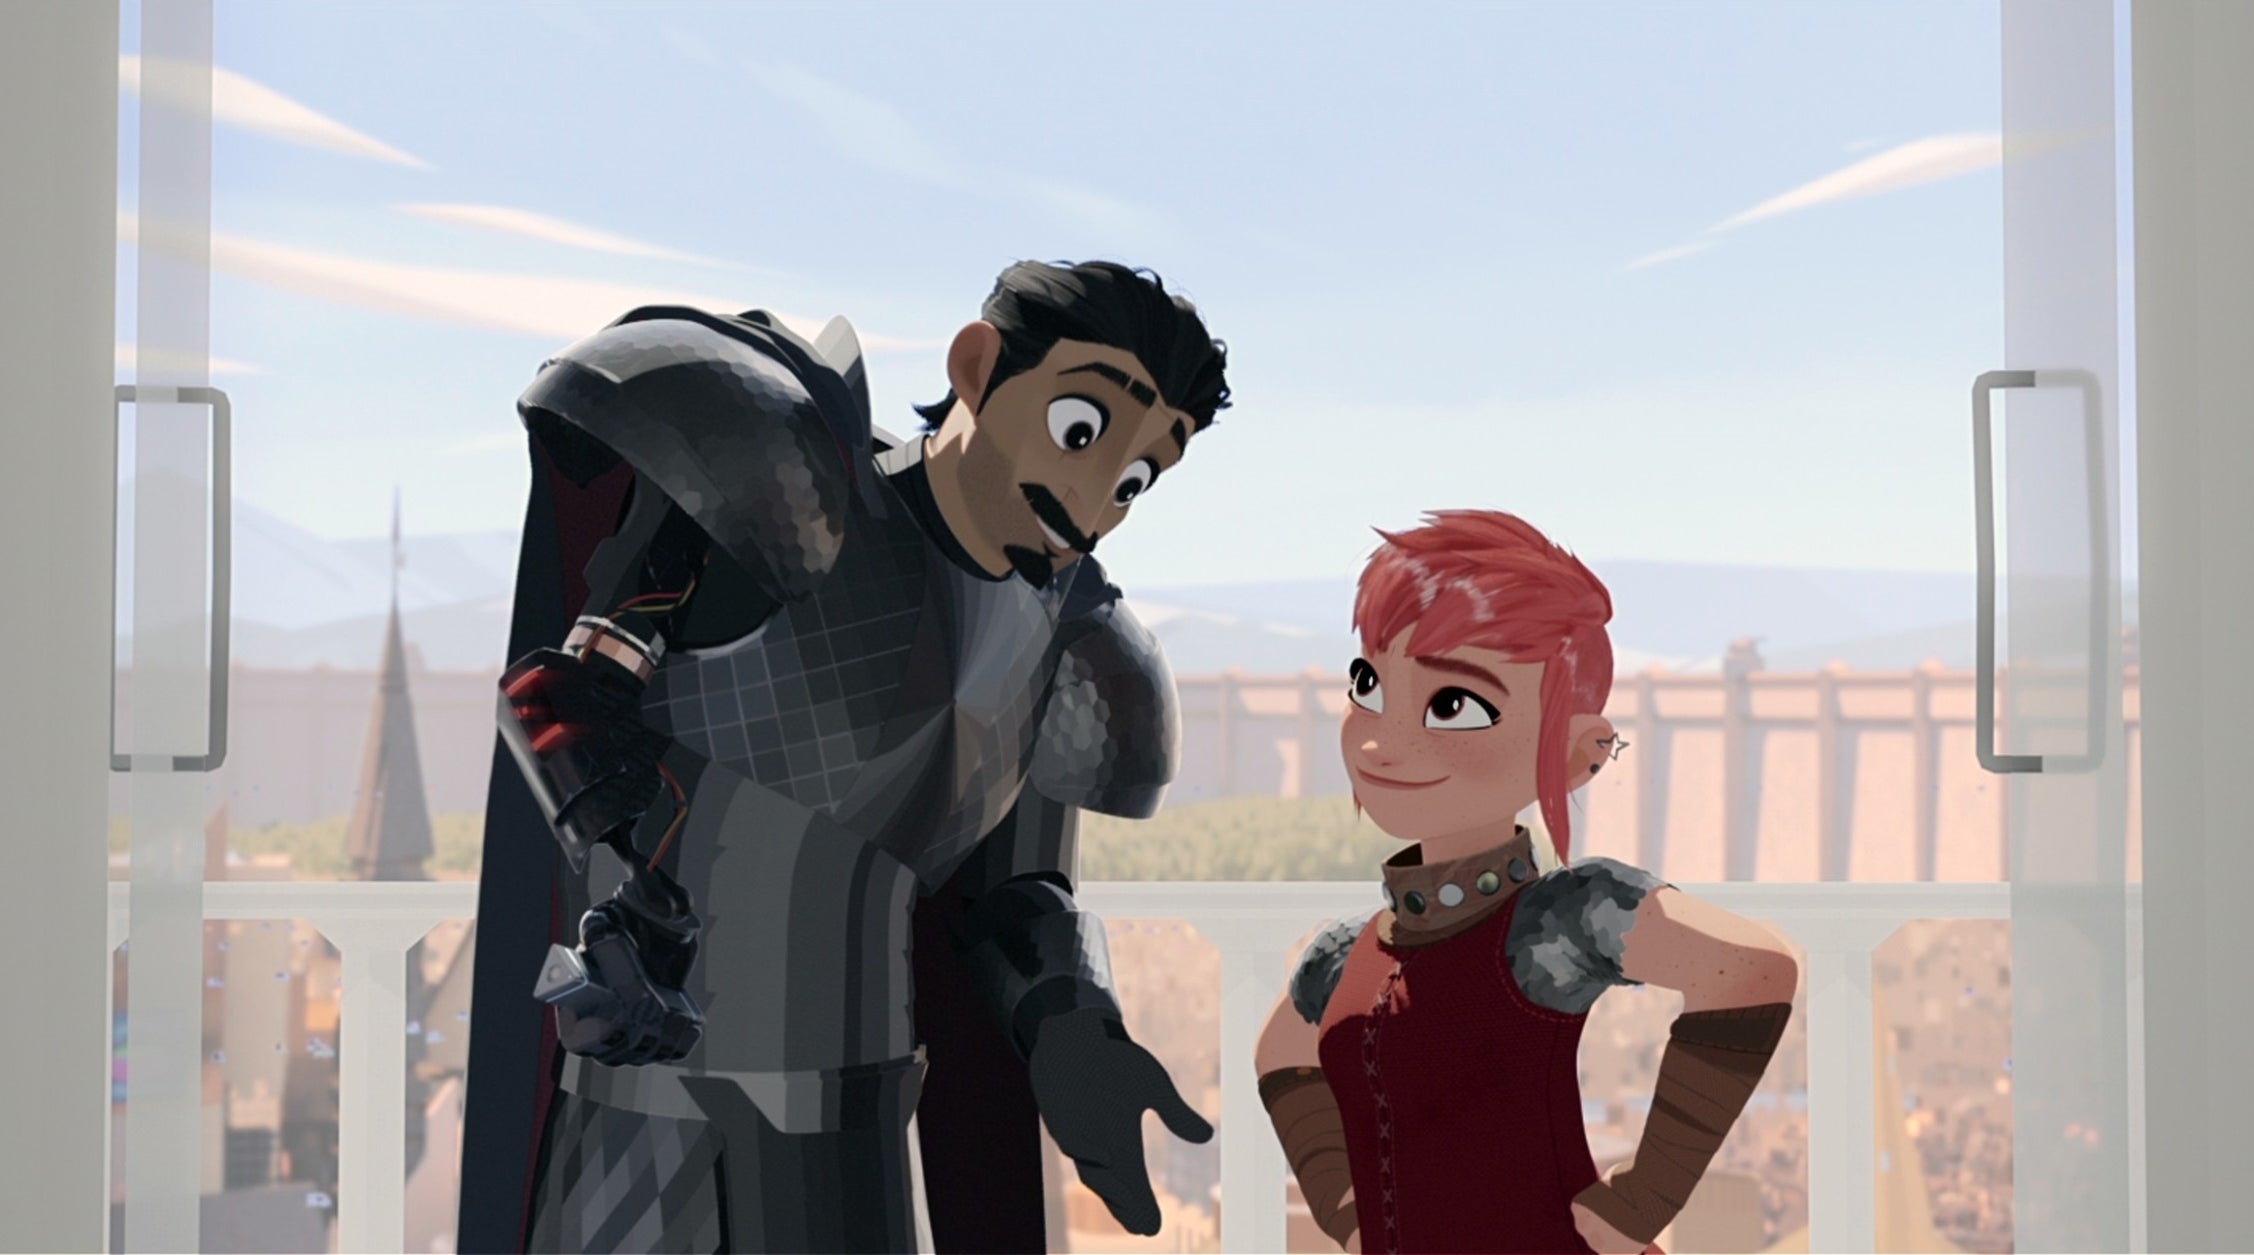 Two animated characters, one in armor and another in leather gear, smile inside a futuristic setting